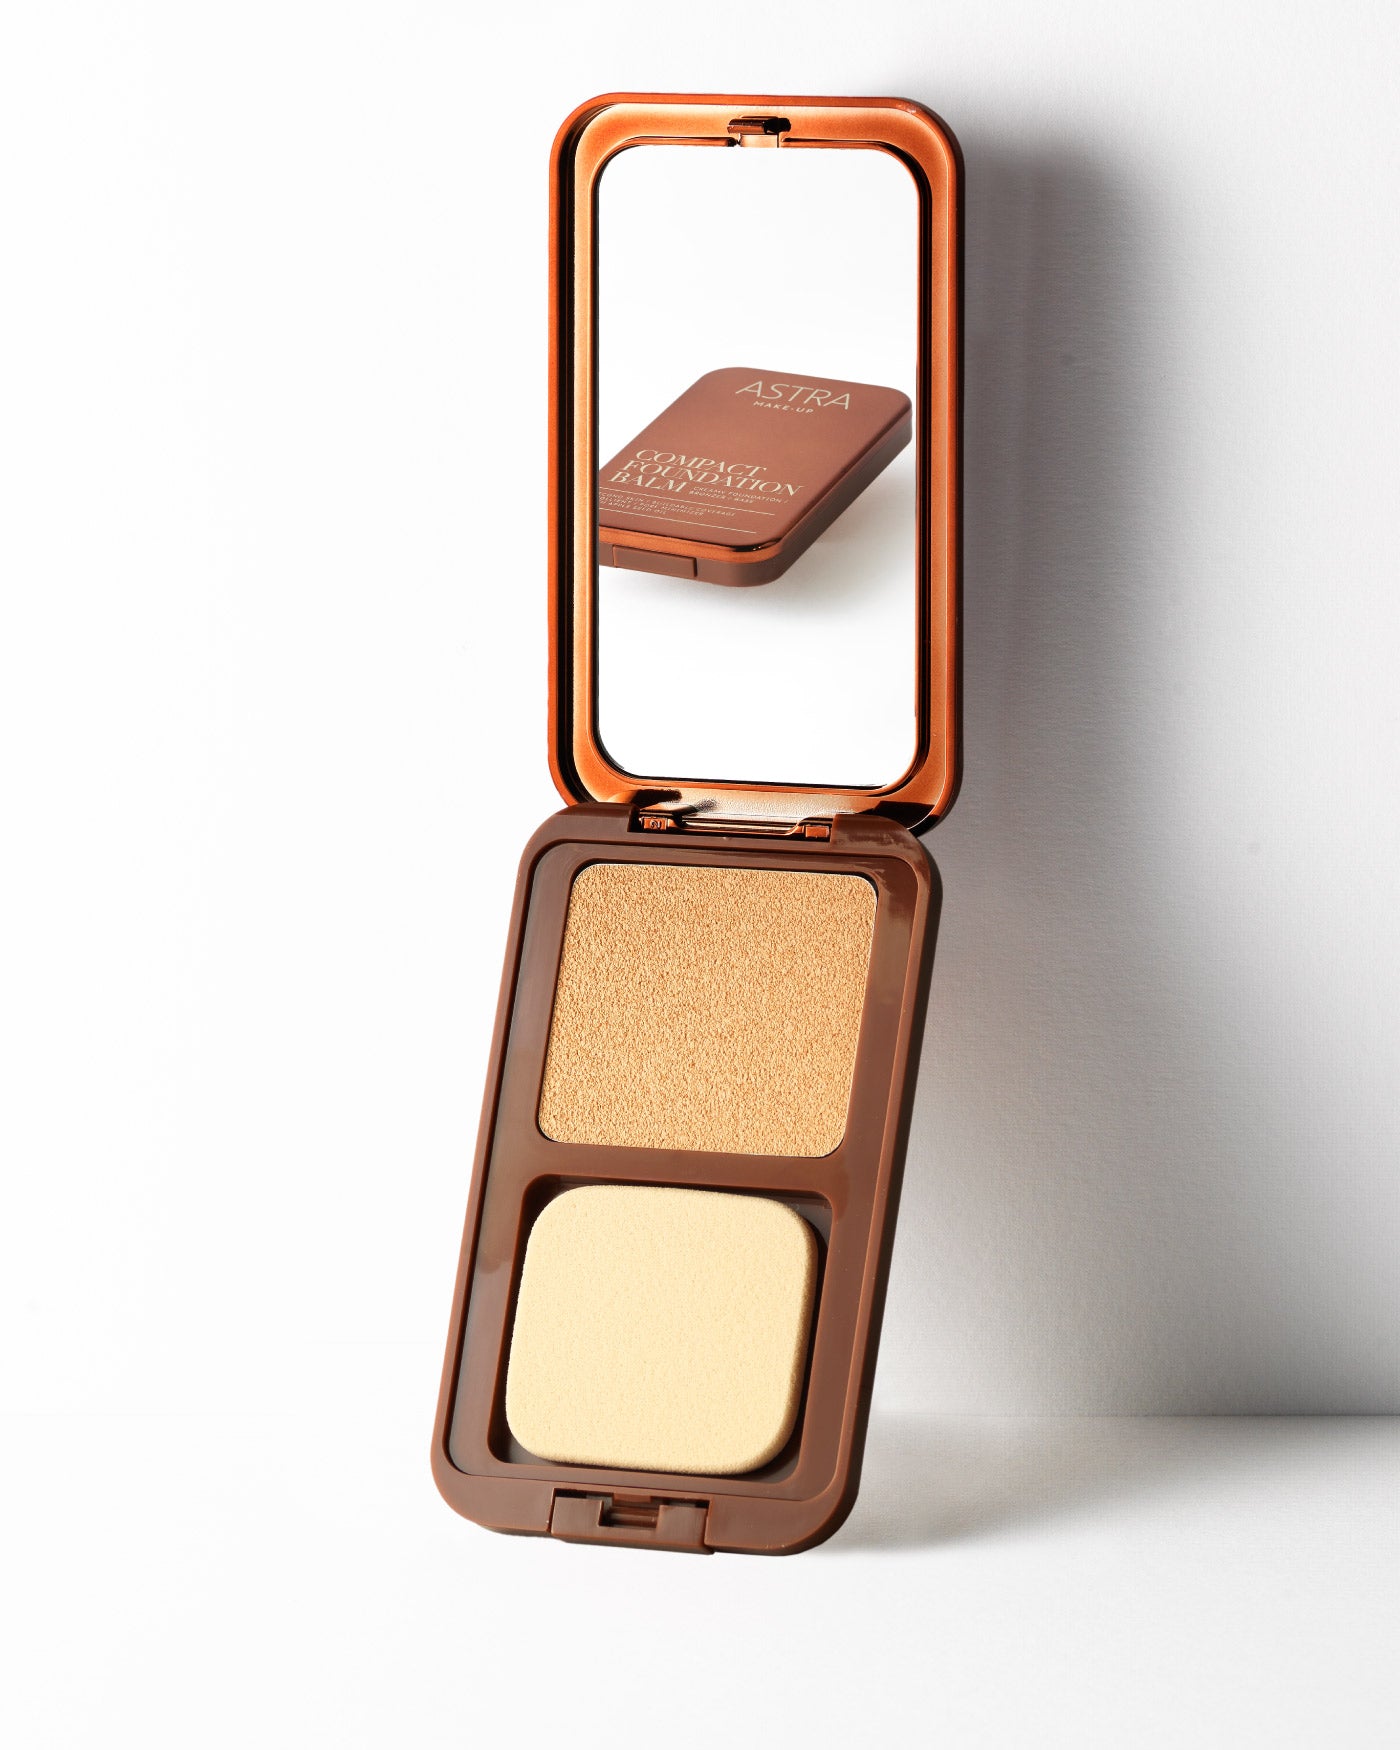 COMPACT FOUNDATION BALM - Face - Astra Make-Up